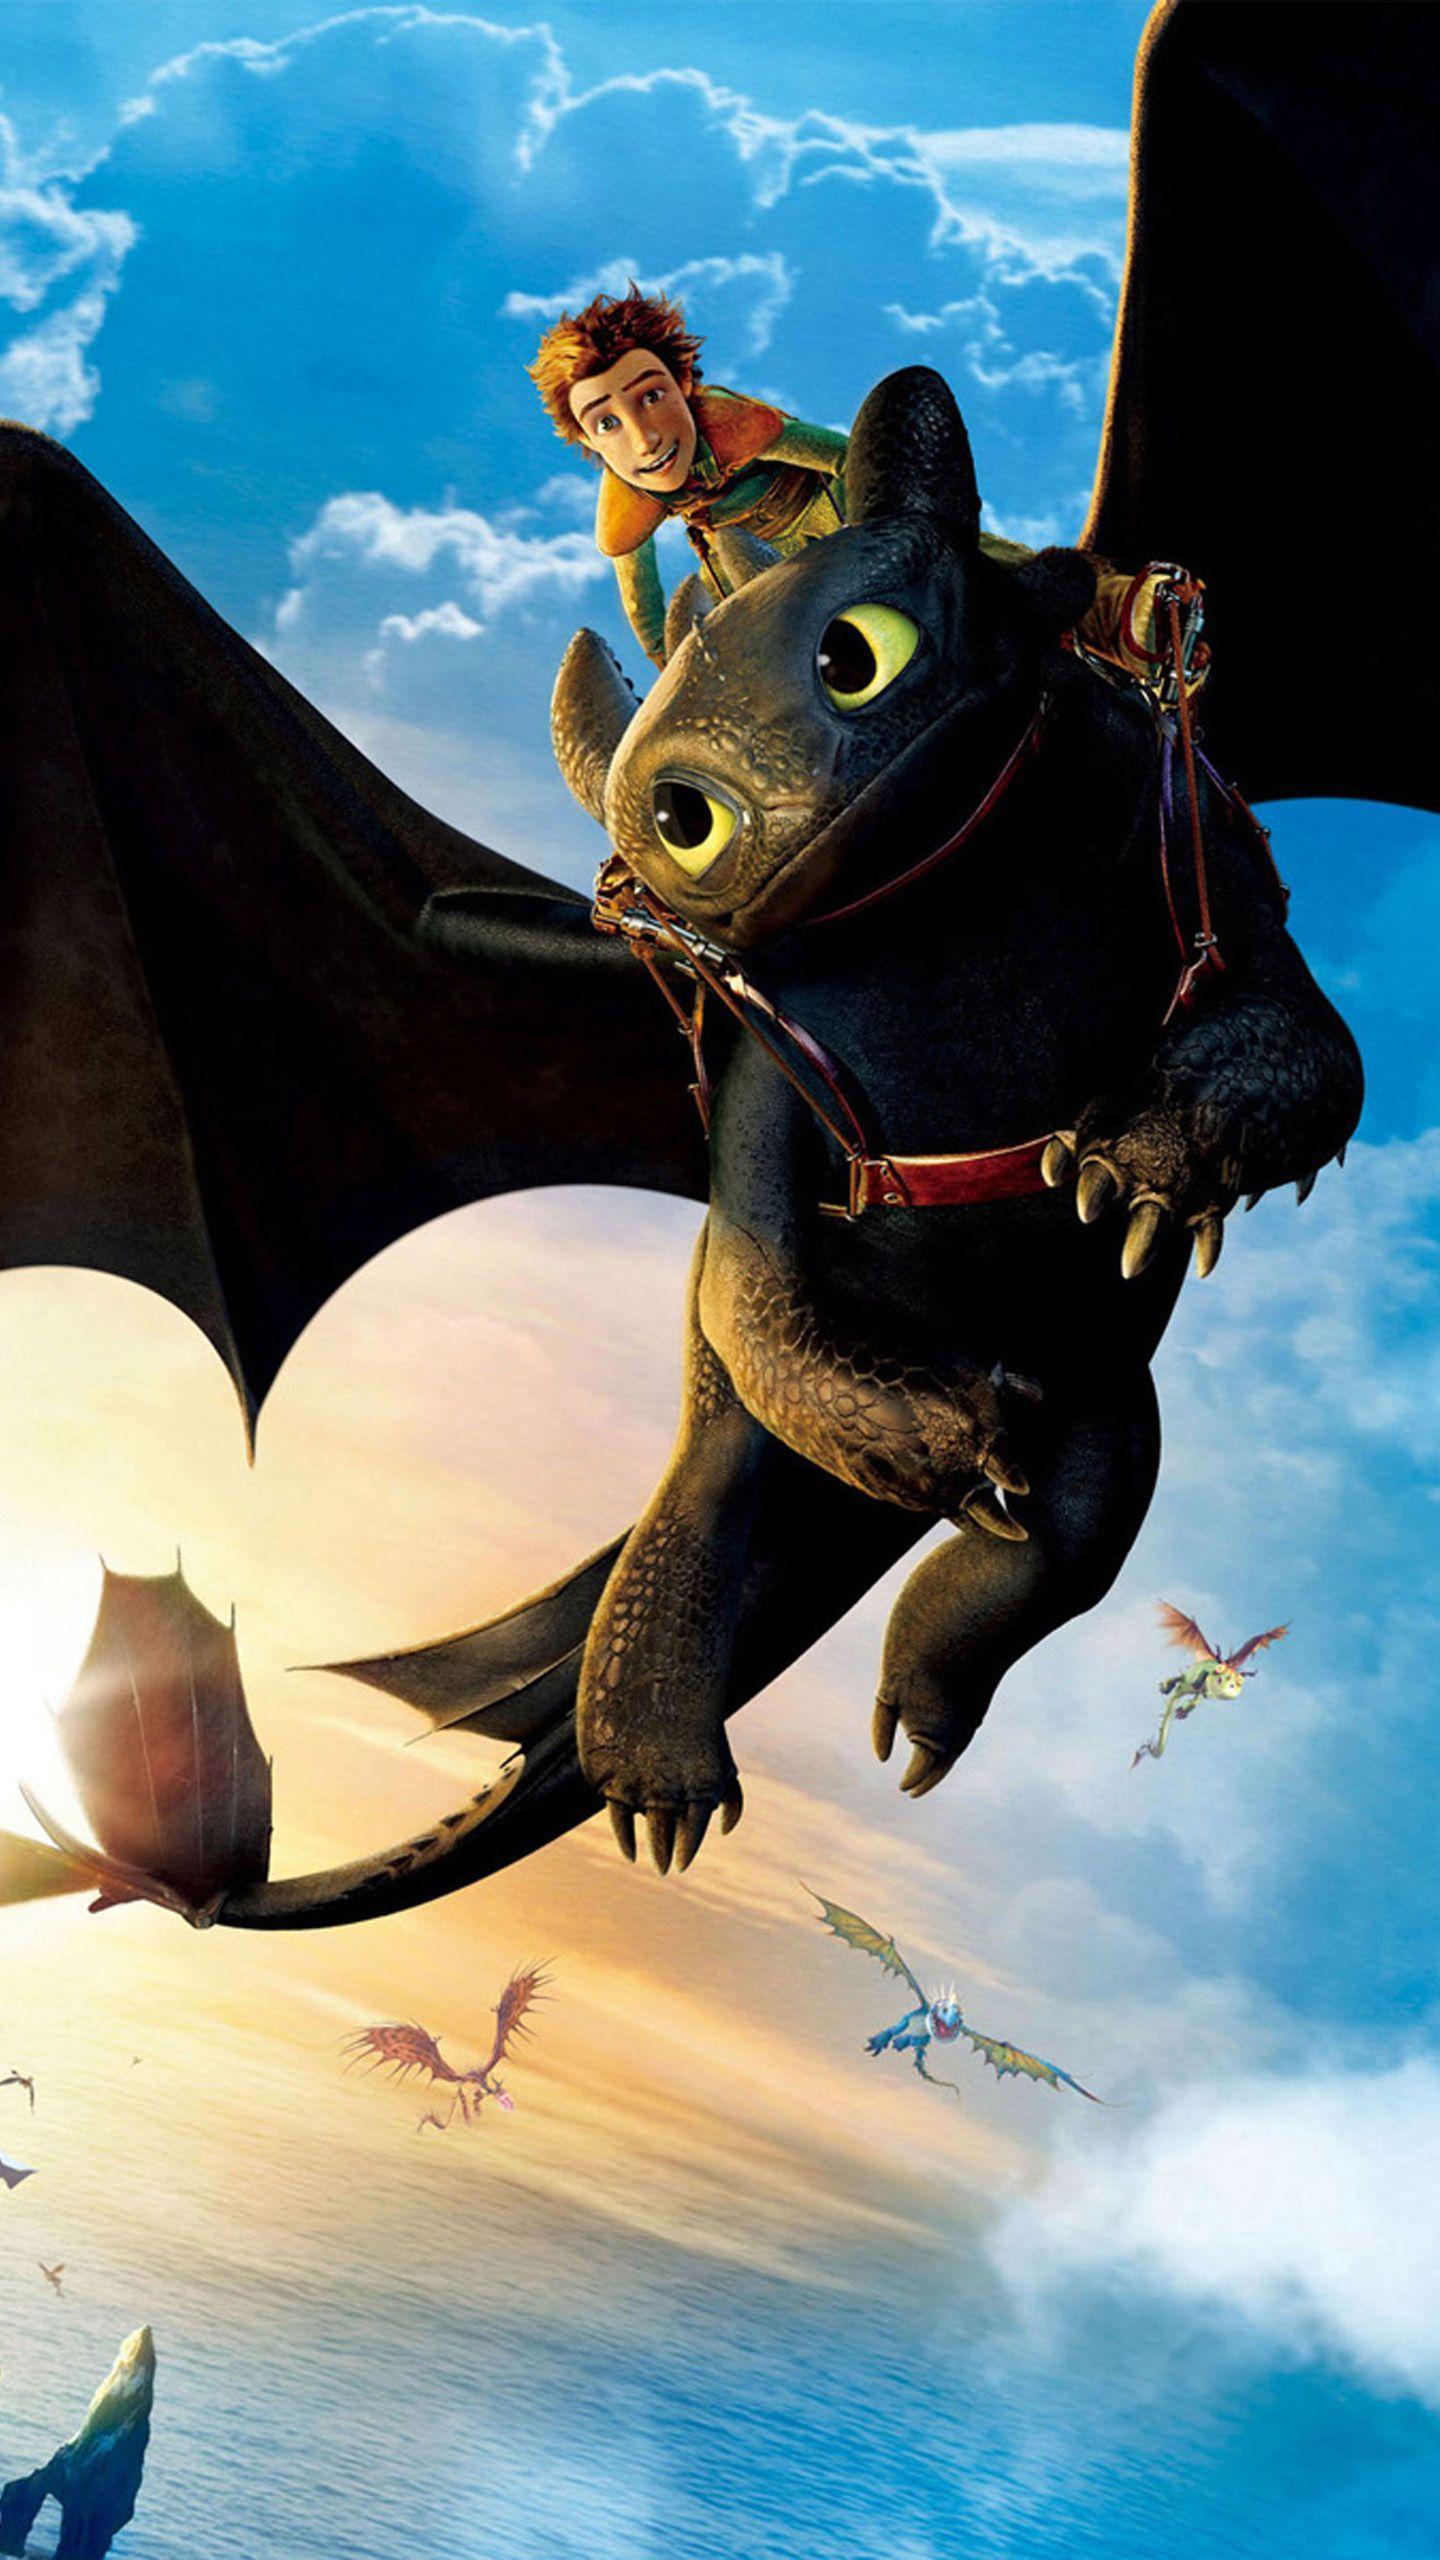 How to Train Your Dragon 2 Galaxy S6 Wallpaper. Galaxy S6 Wallpaper